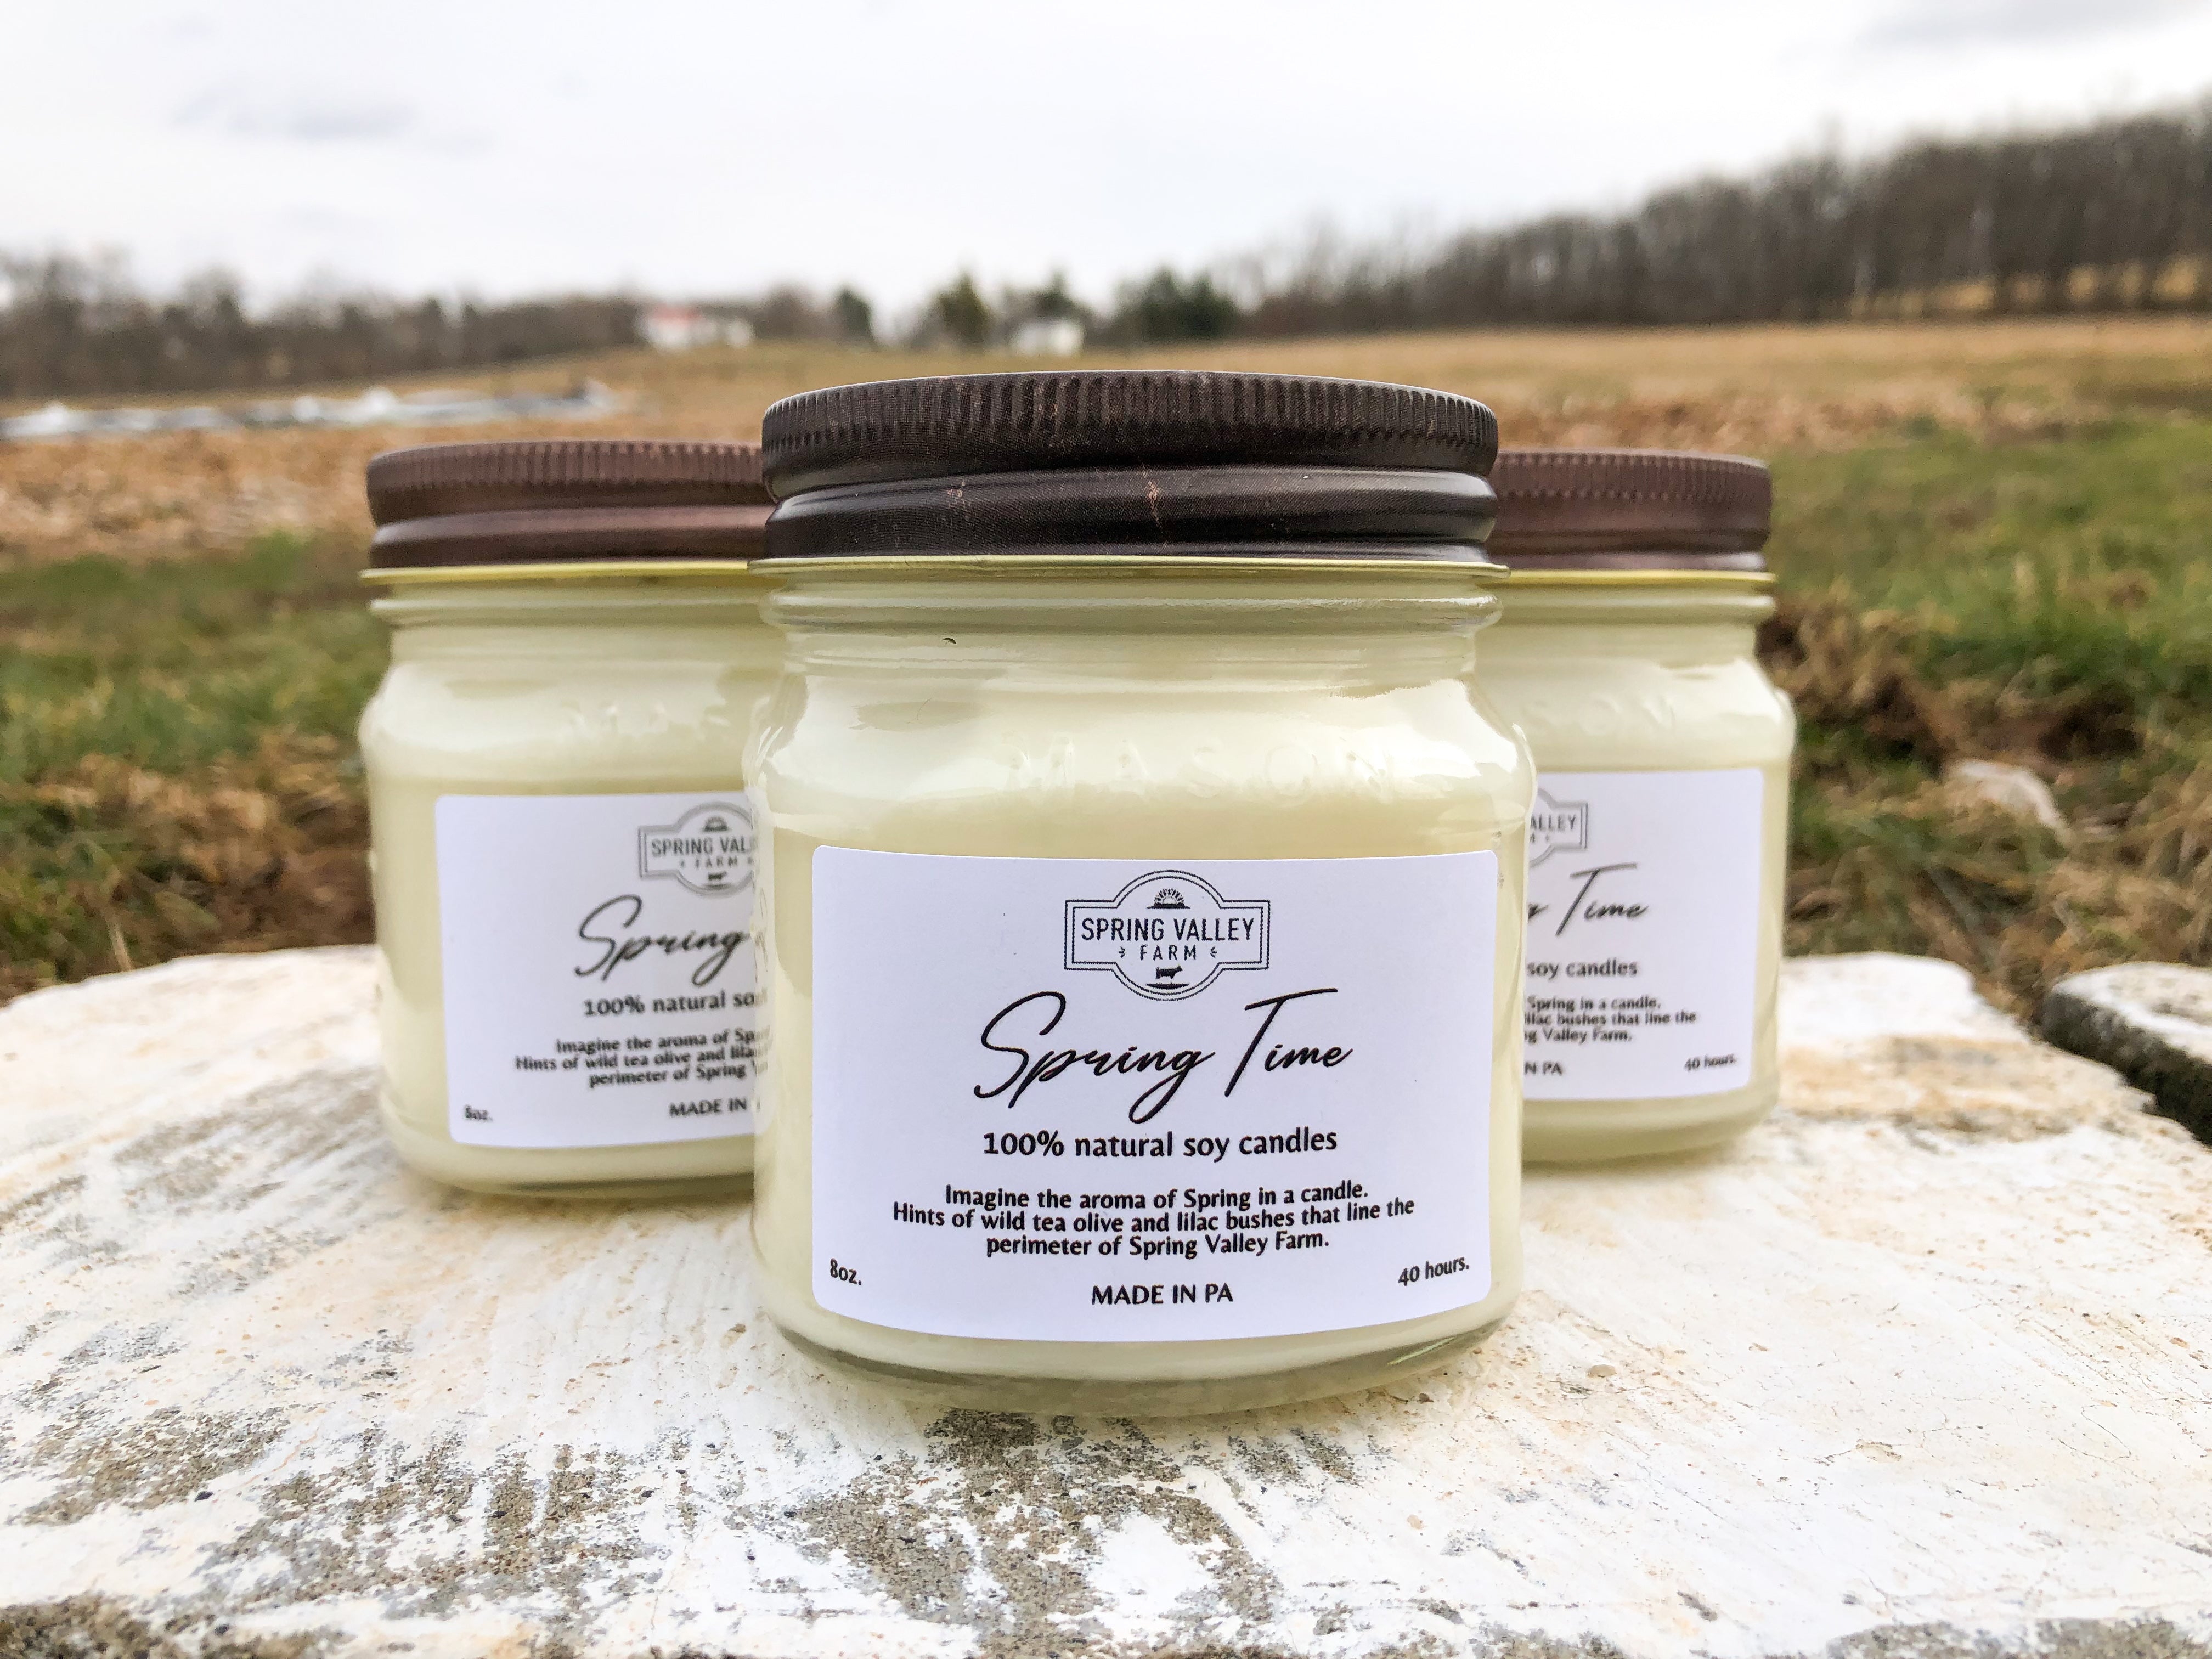 Special Edition - "Spring Time" Candle